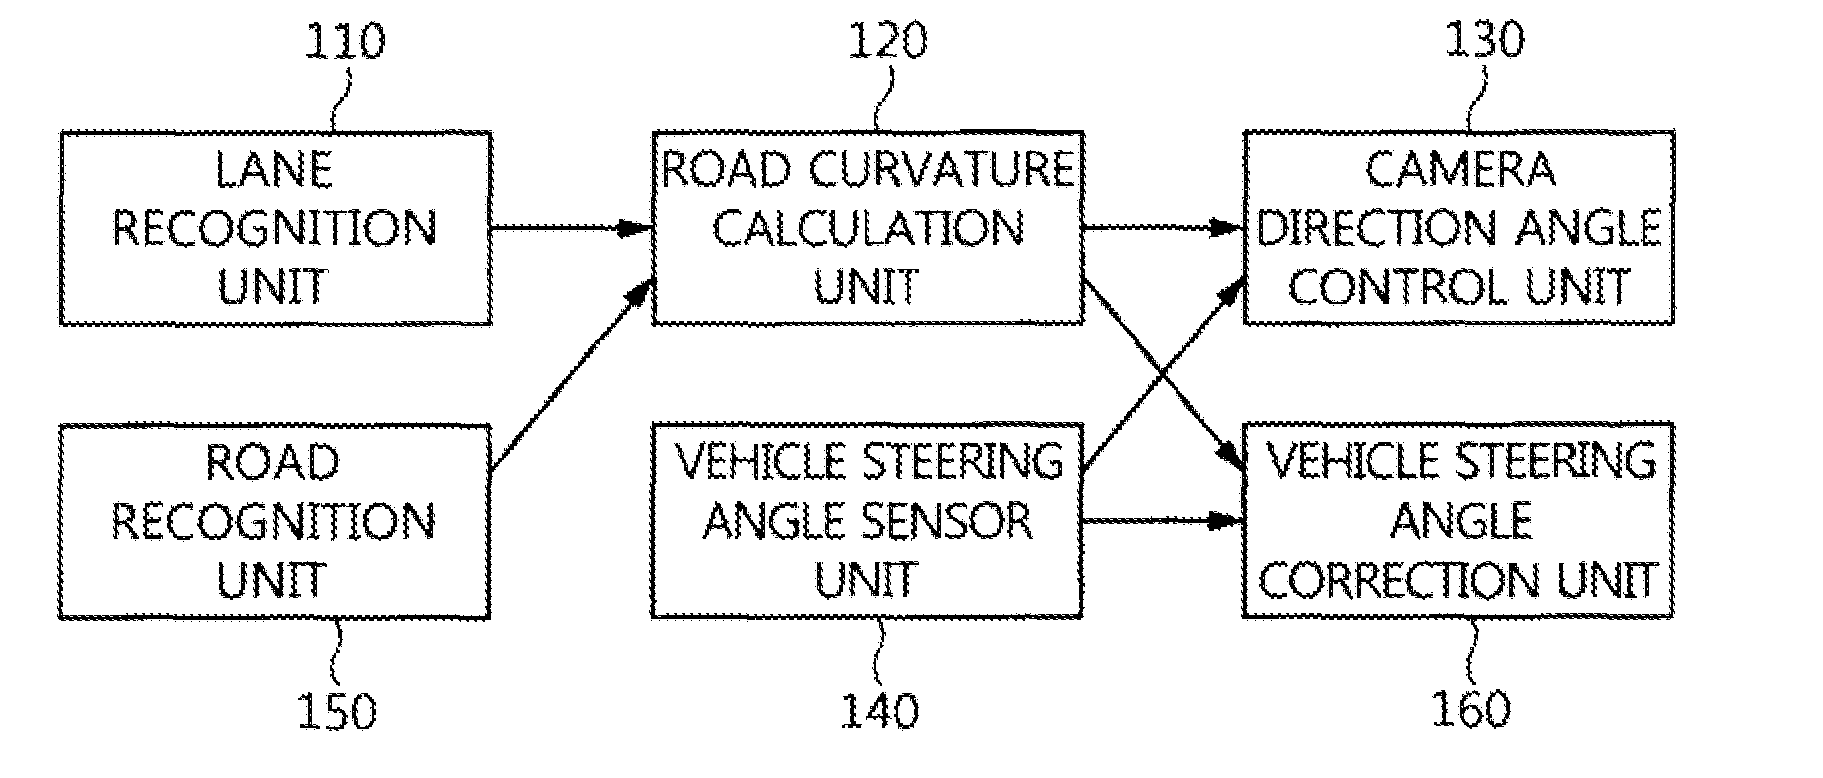 Lane tracking apparatus and method using camera direction control